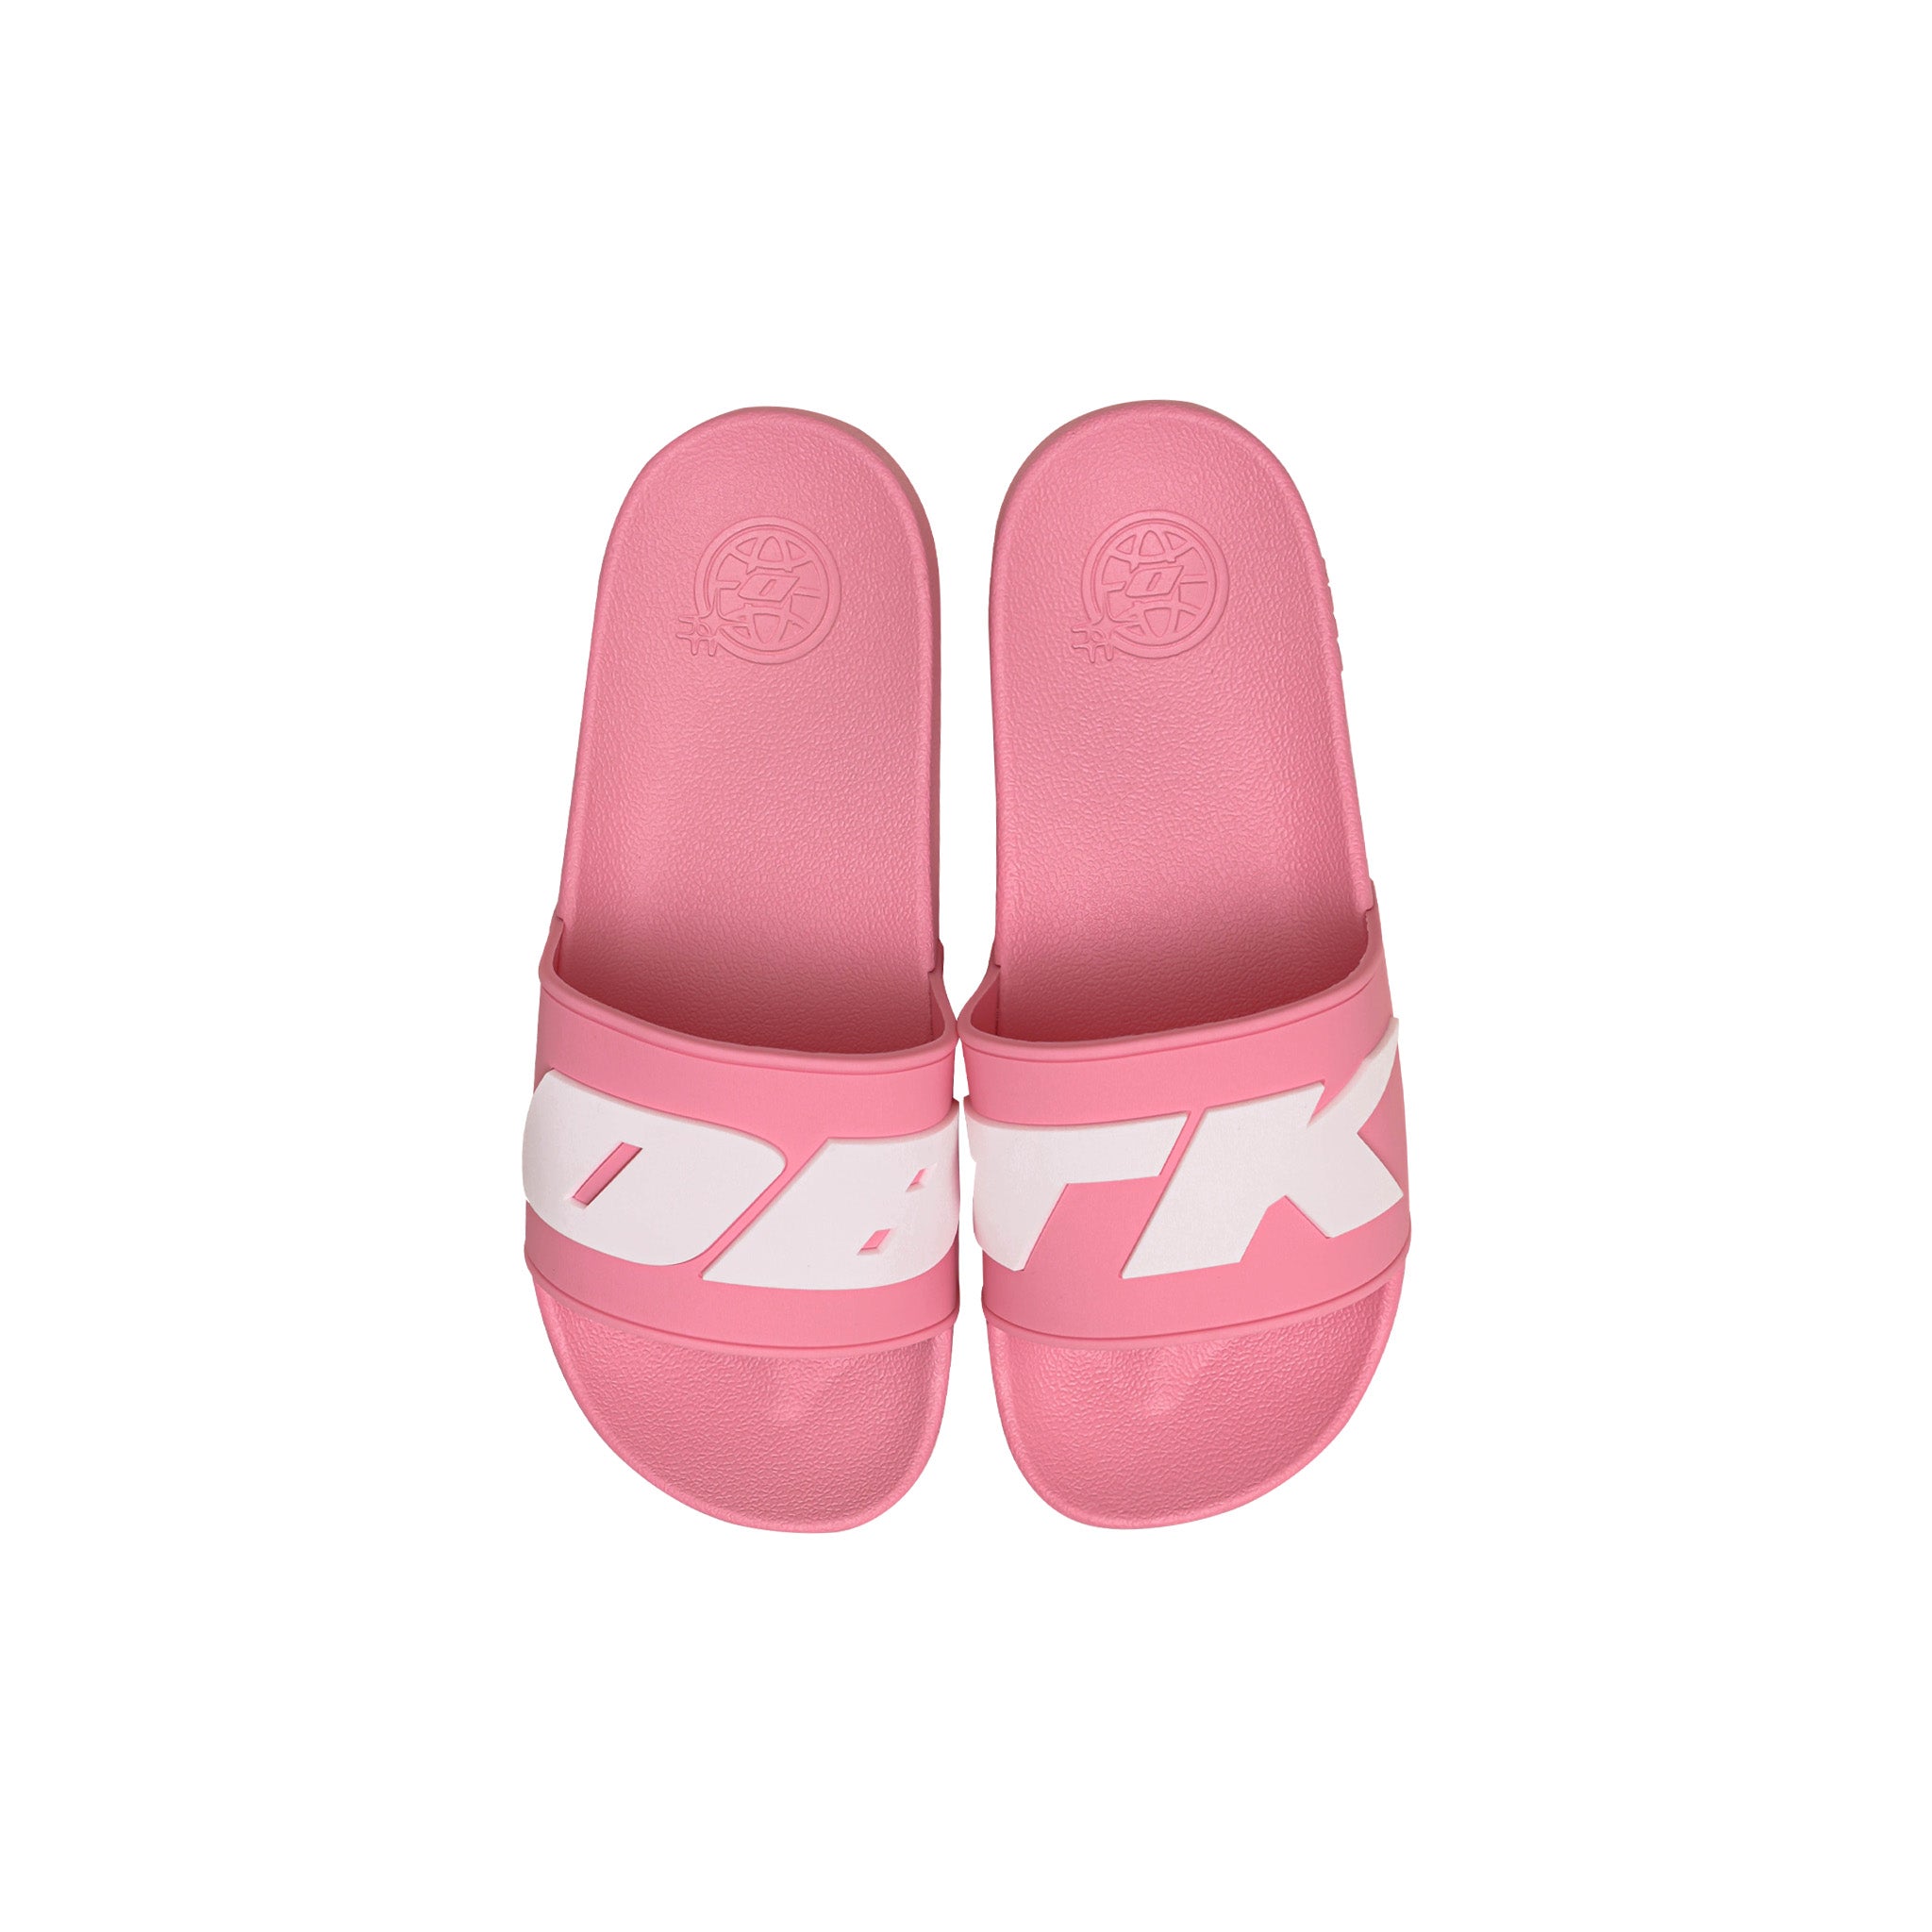 DBTK Cipher 002 Slides - PINK (exclusive for Women's Sizing only ...